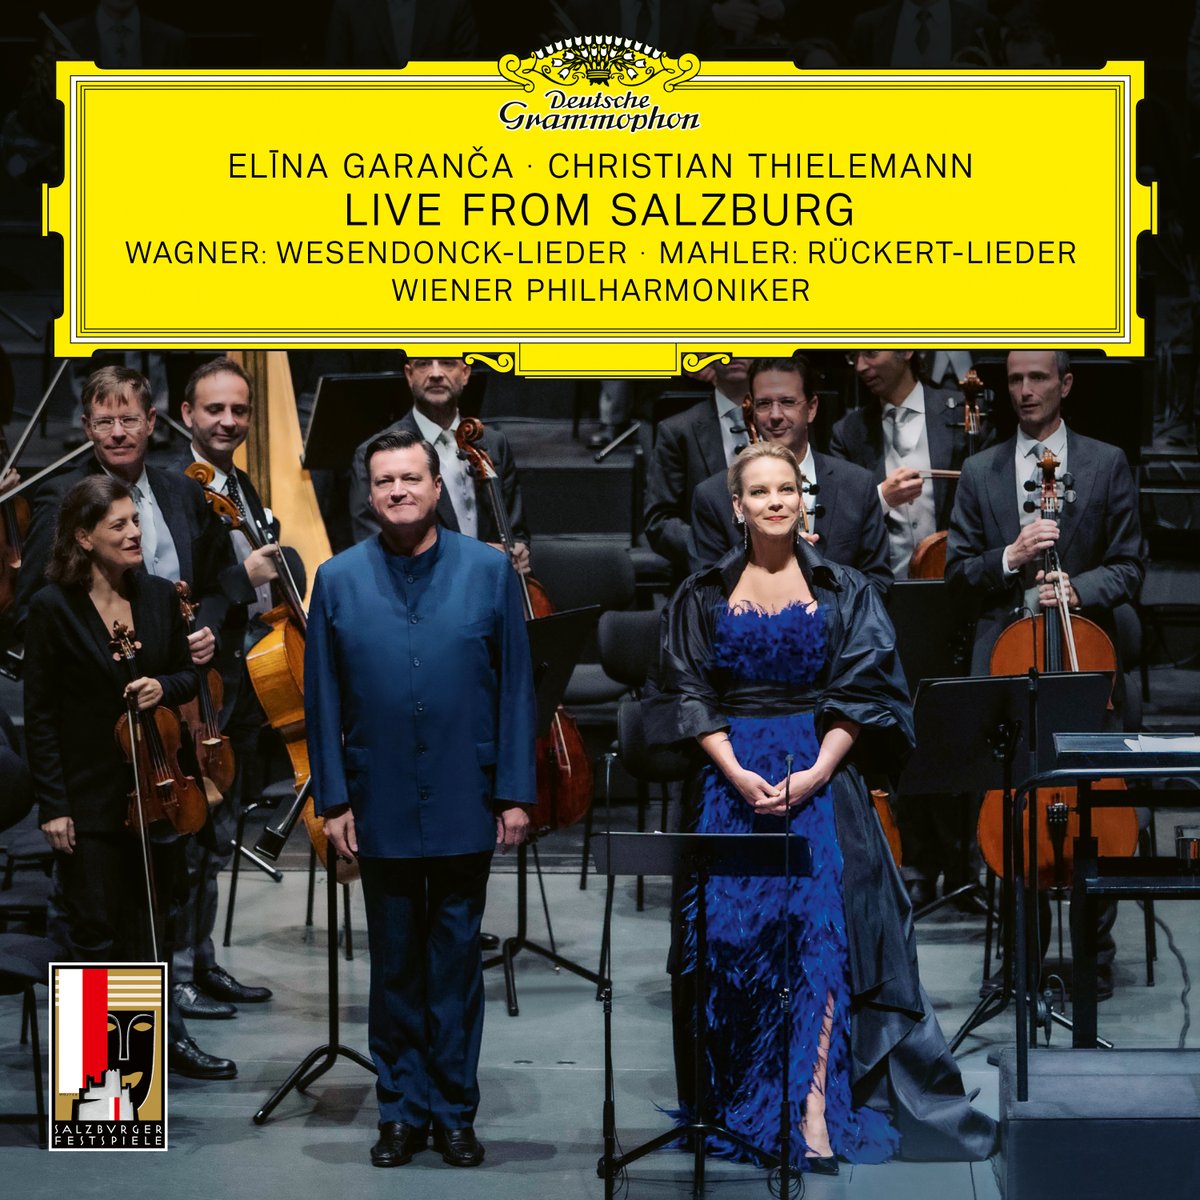 Two remarkable events are set for release by @DGclassics on 3 December 2021, Live from Salzburg documents, featuring my appearances at the @SbgFestival in the summers of 2020 and 2021 with the @Vienna_Phil and Christian Thielemann. Pre-order now dgt.link/ElinaSalzburg